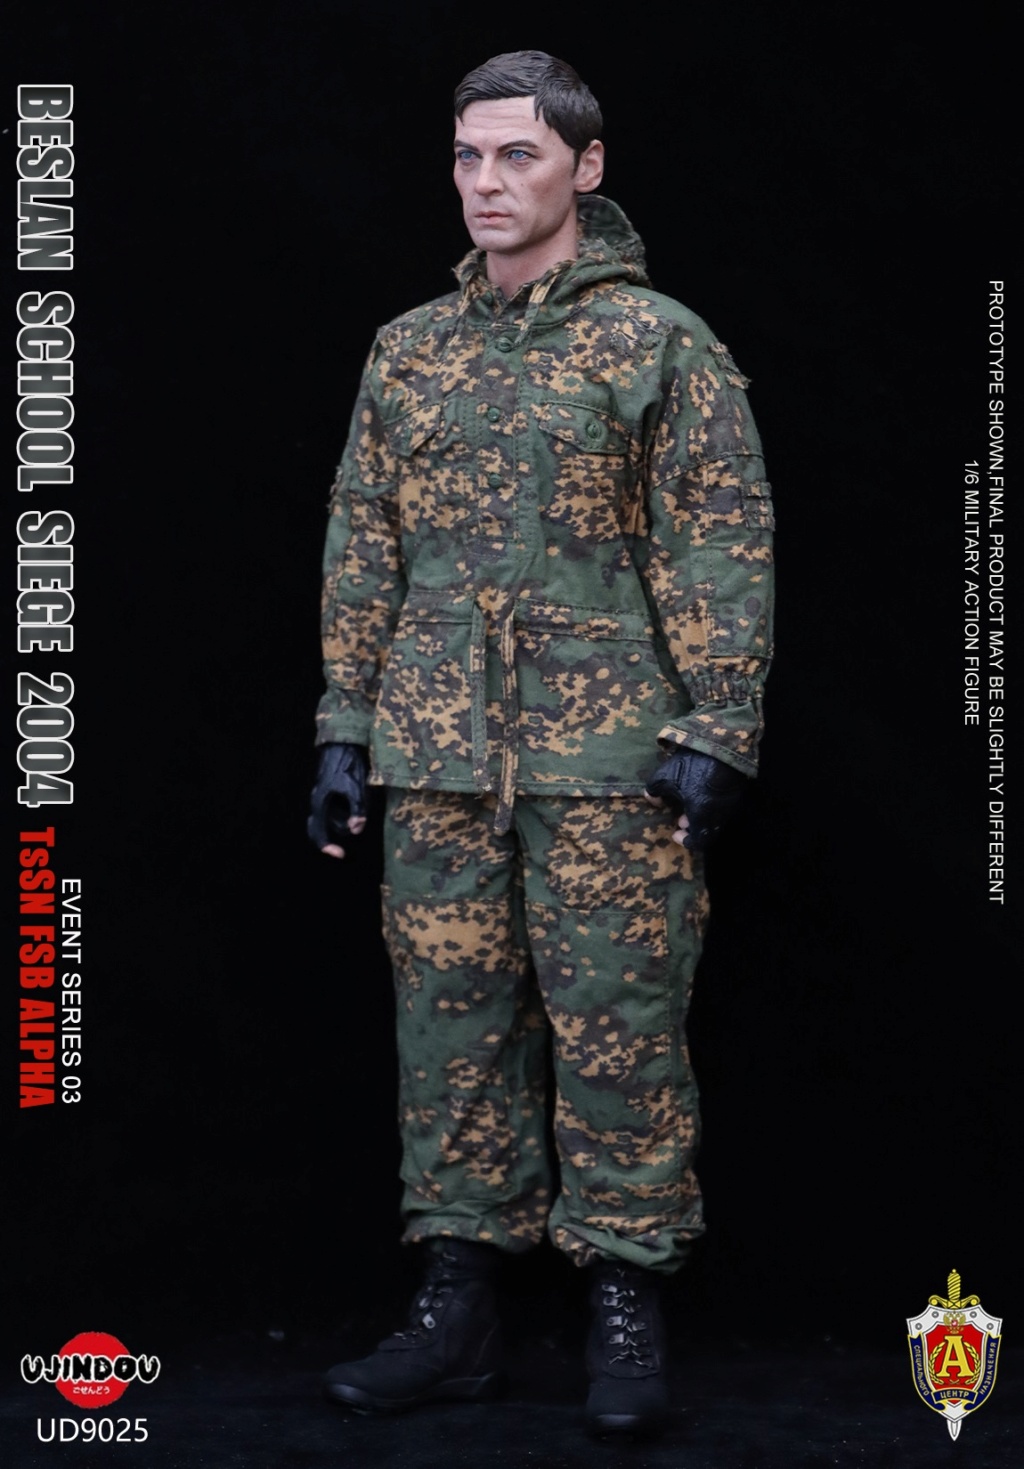 Male - NEW PRODUCT: UJINDOU: 1/6 FSB Special Forces of the Russian Federal Security Service - Beslan Incident 2004 #UD9025 11141510